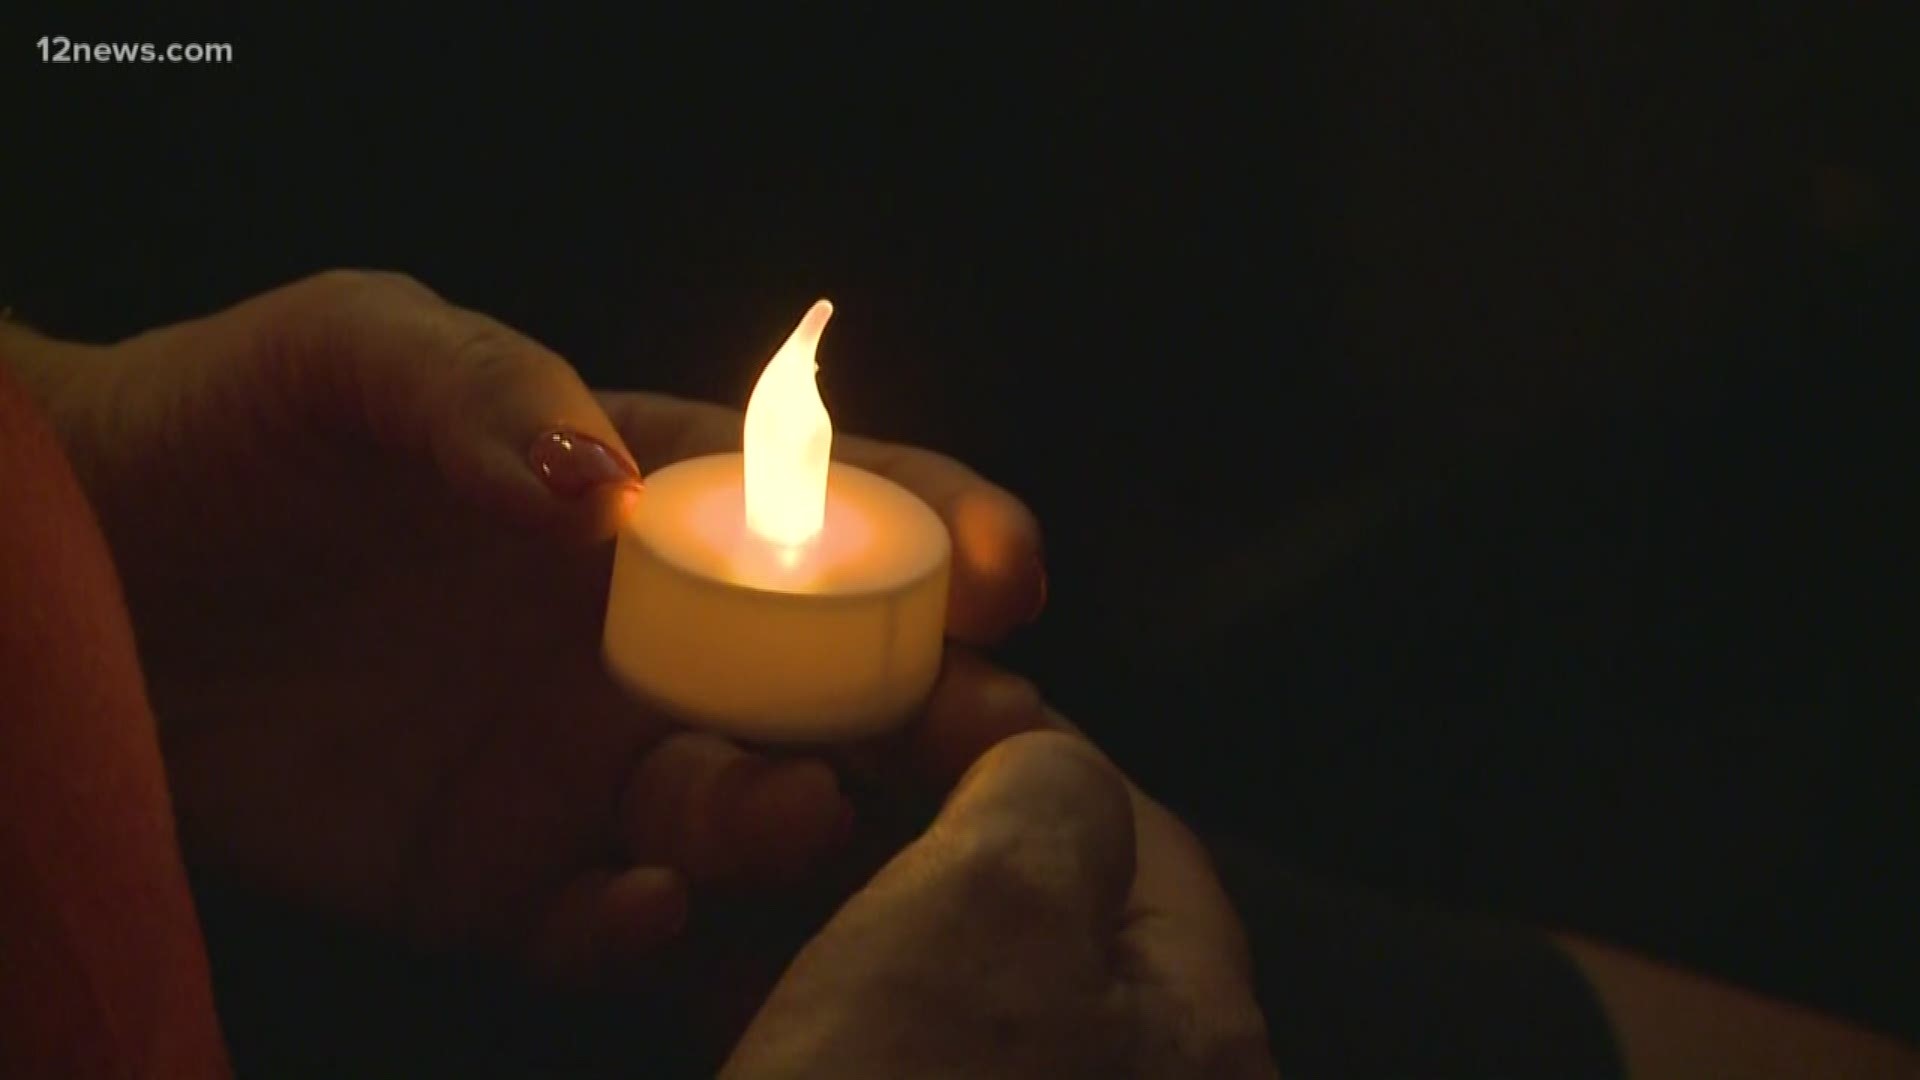 First Church United Church of Christ of Phoenix held a candlelight vigil Sunday after 29 people were killed in 2 mass shootings in less than 24 hours.